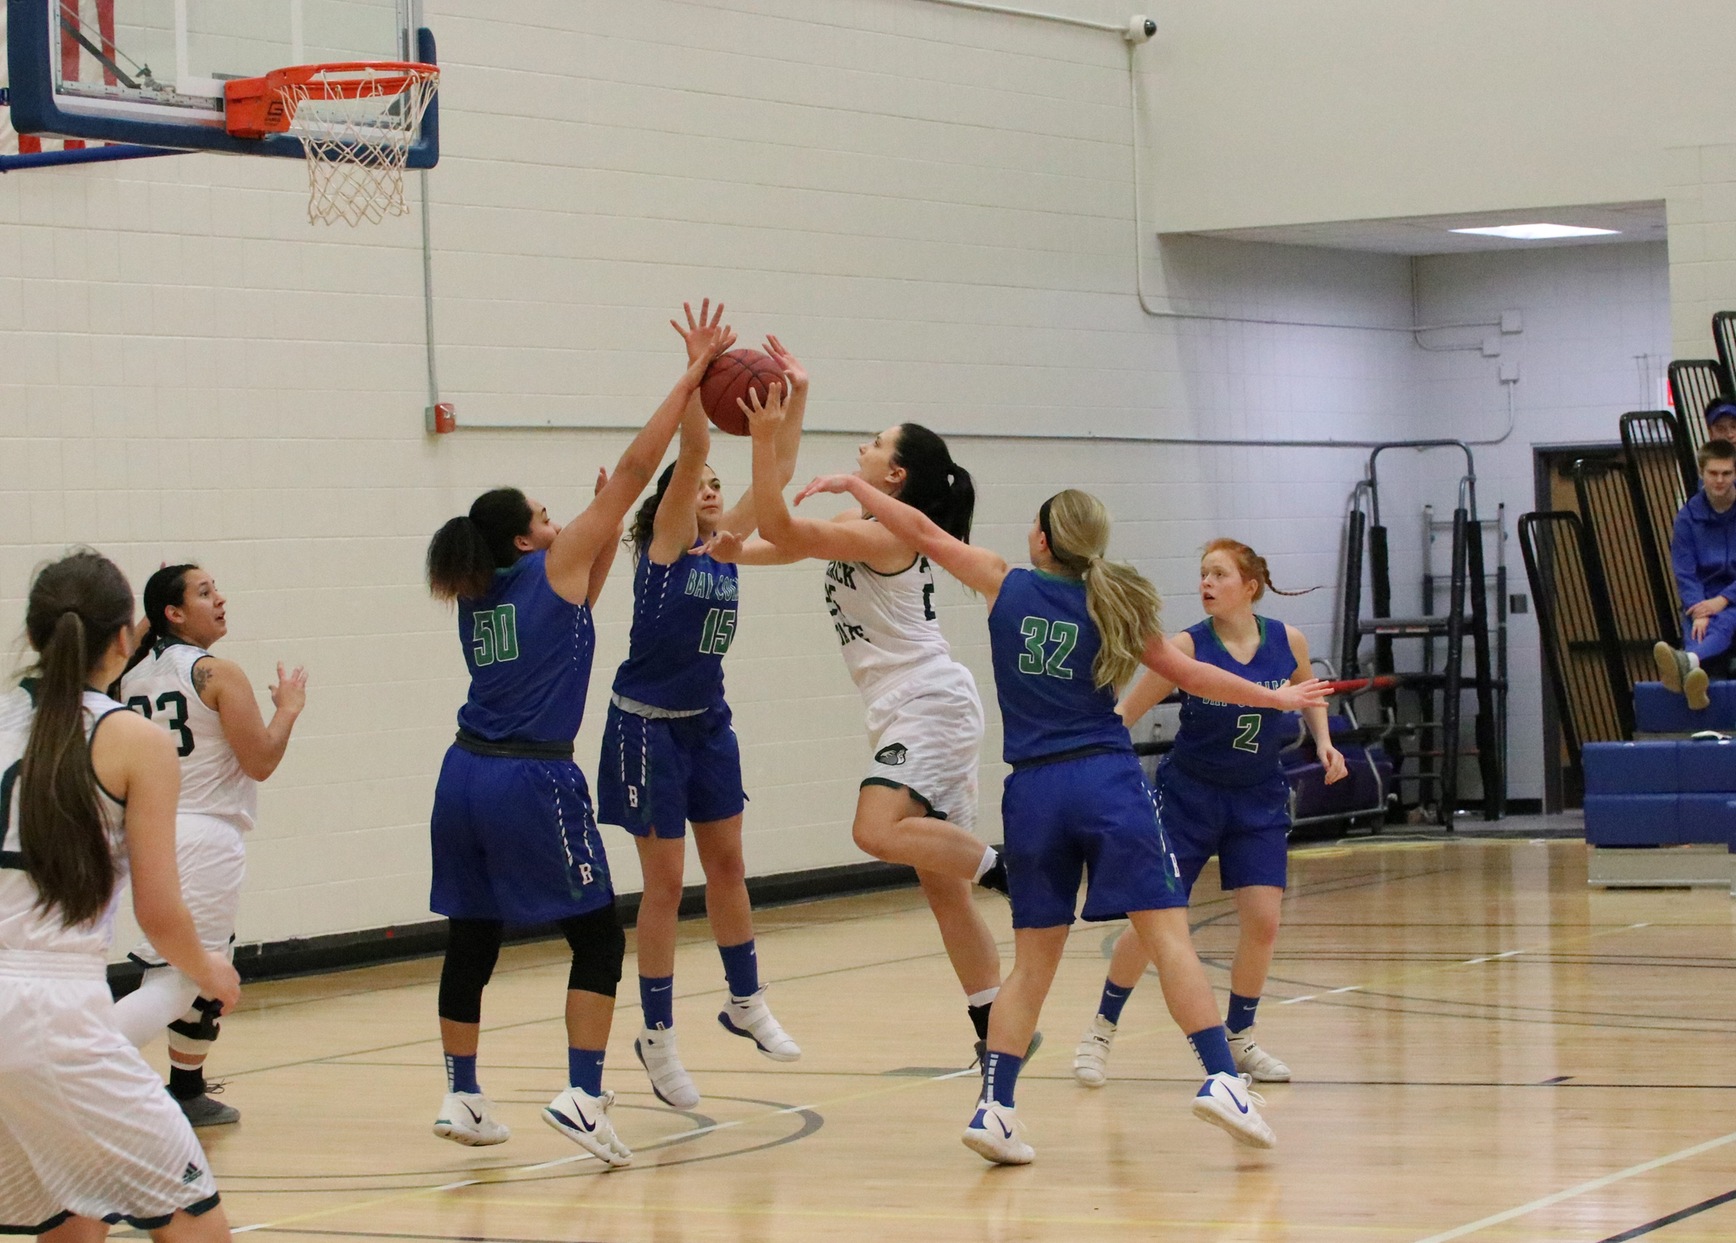 Keshia Davis has a hand on a defenders shot in the lane, as Brooke Dalgord is closely by, also about to block the attempt.